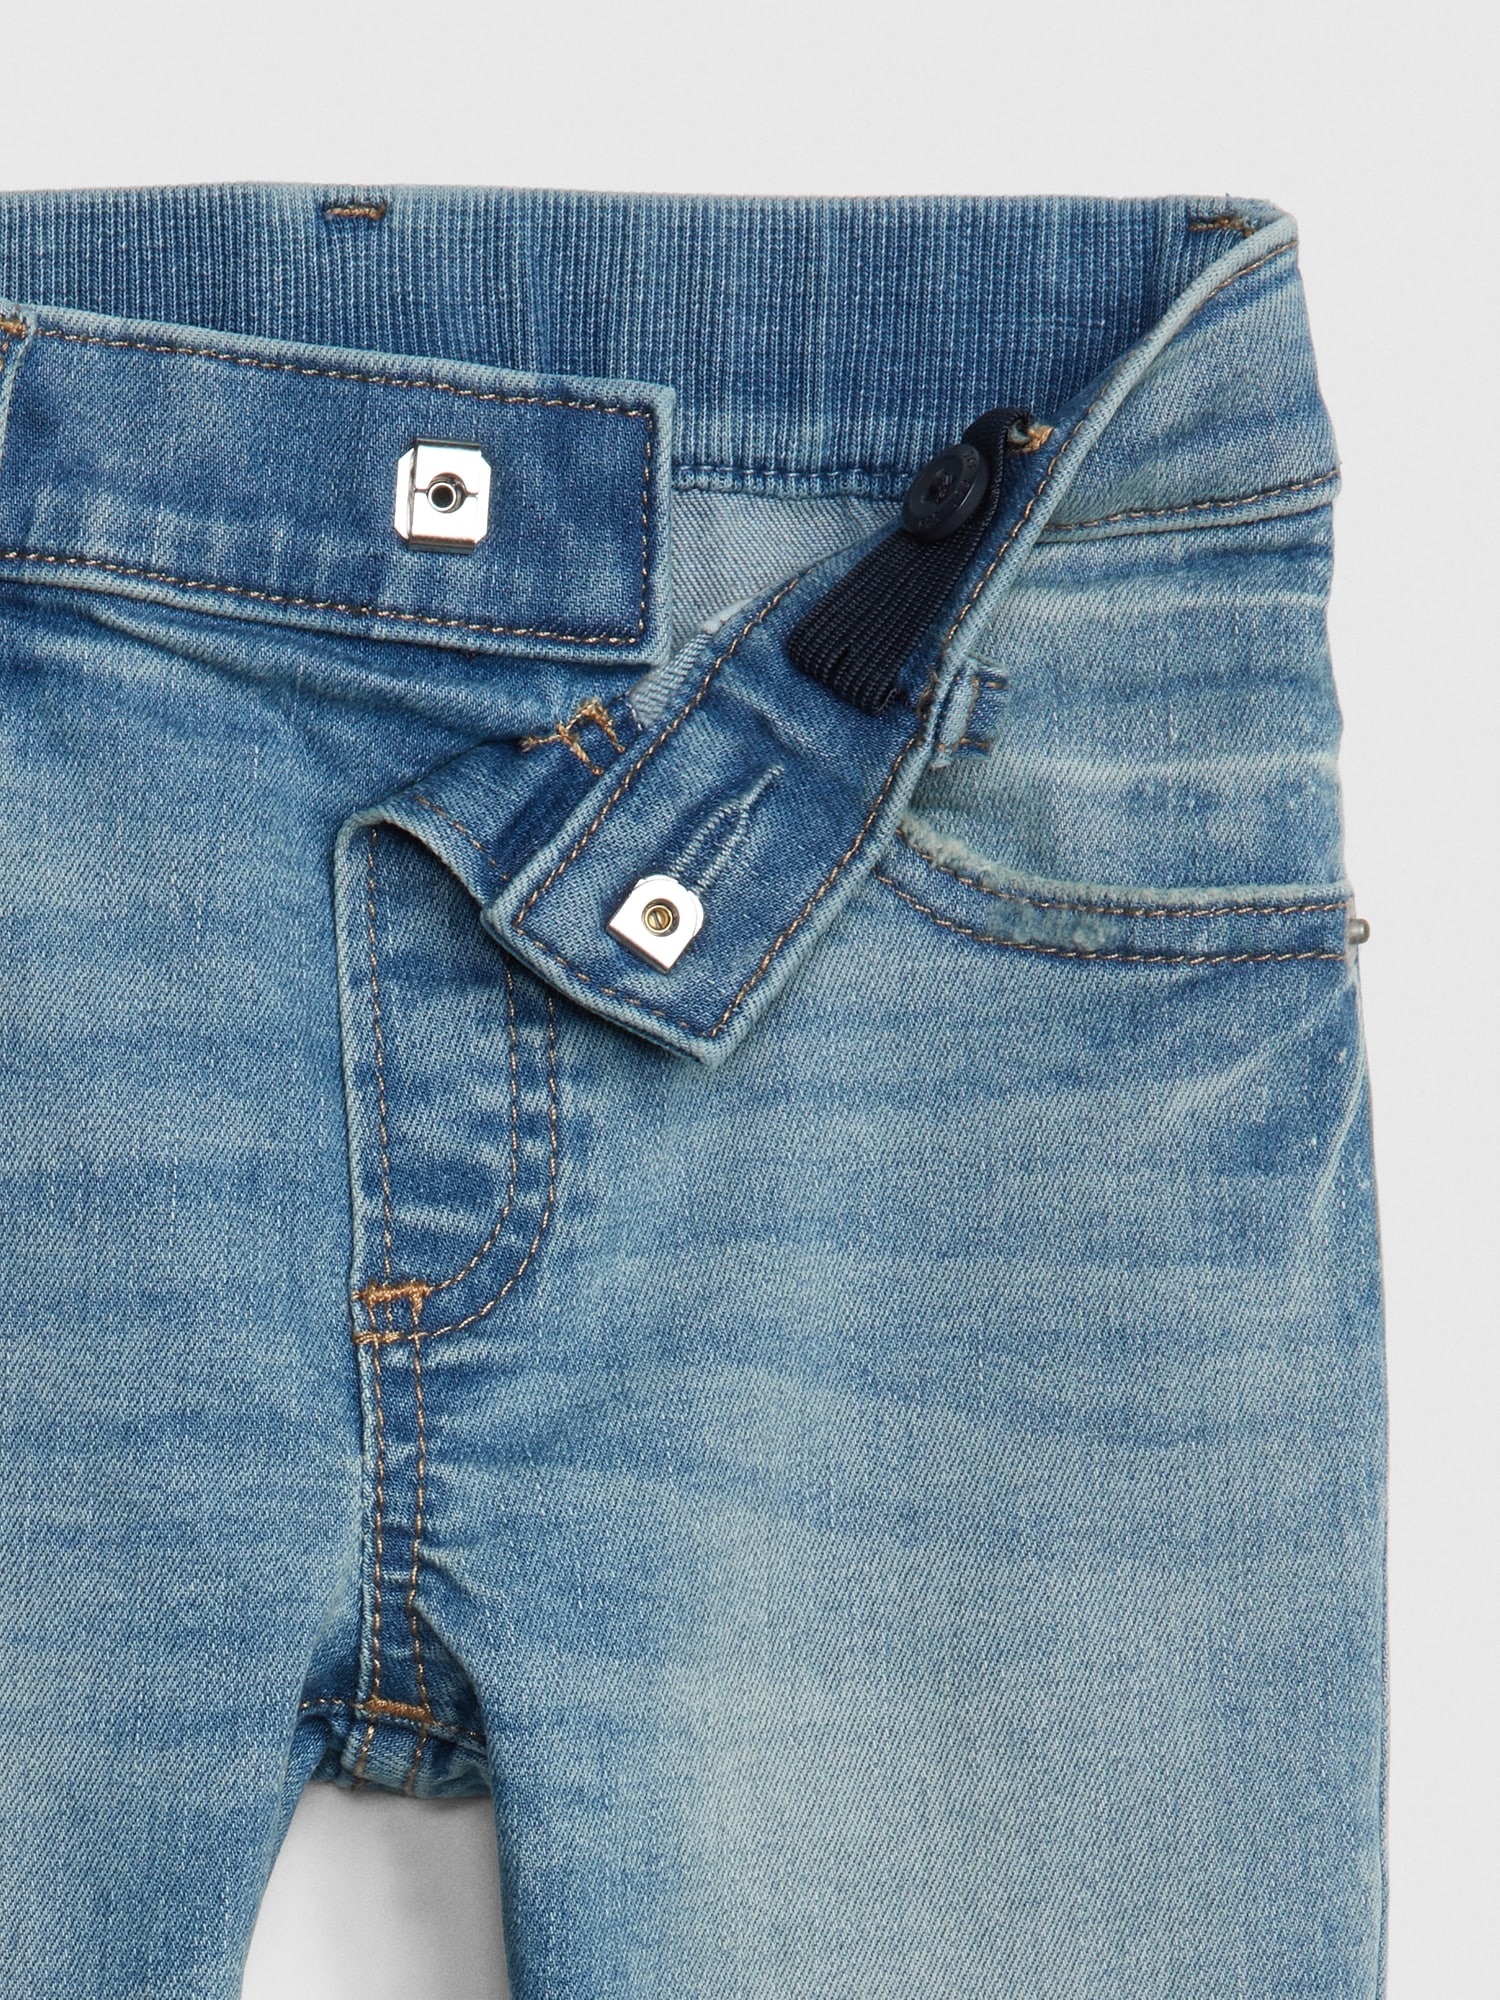 Toddler Elasticized Pull-On Slim Taper Jeans with Washwell™ | Gap